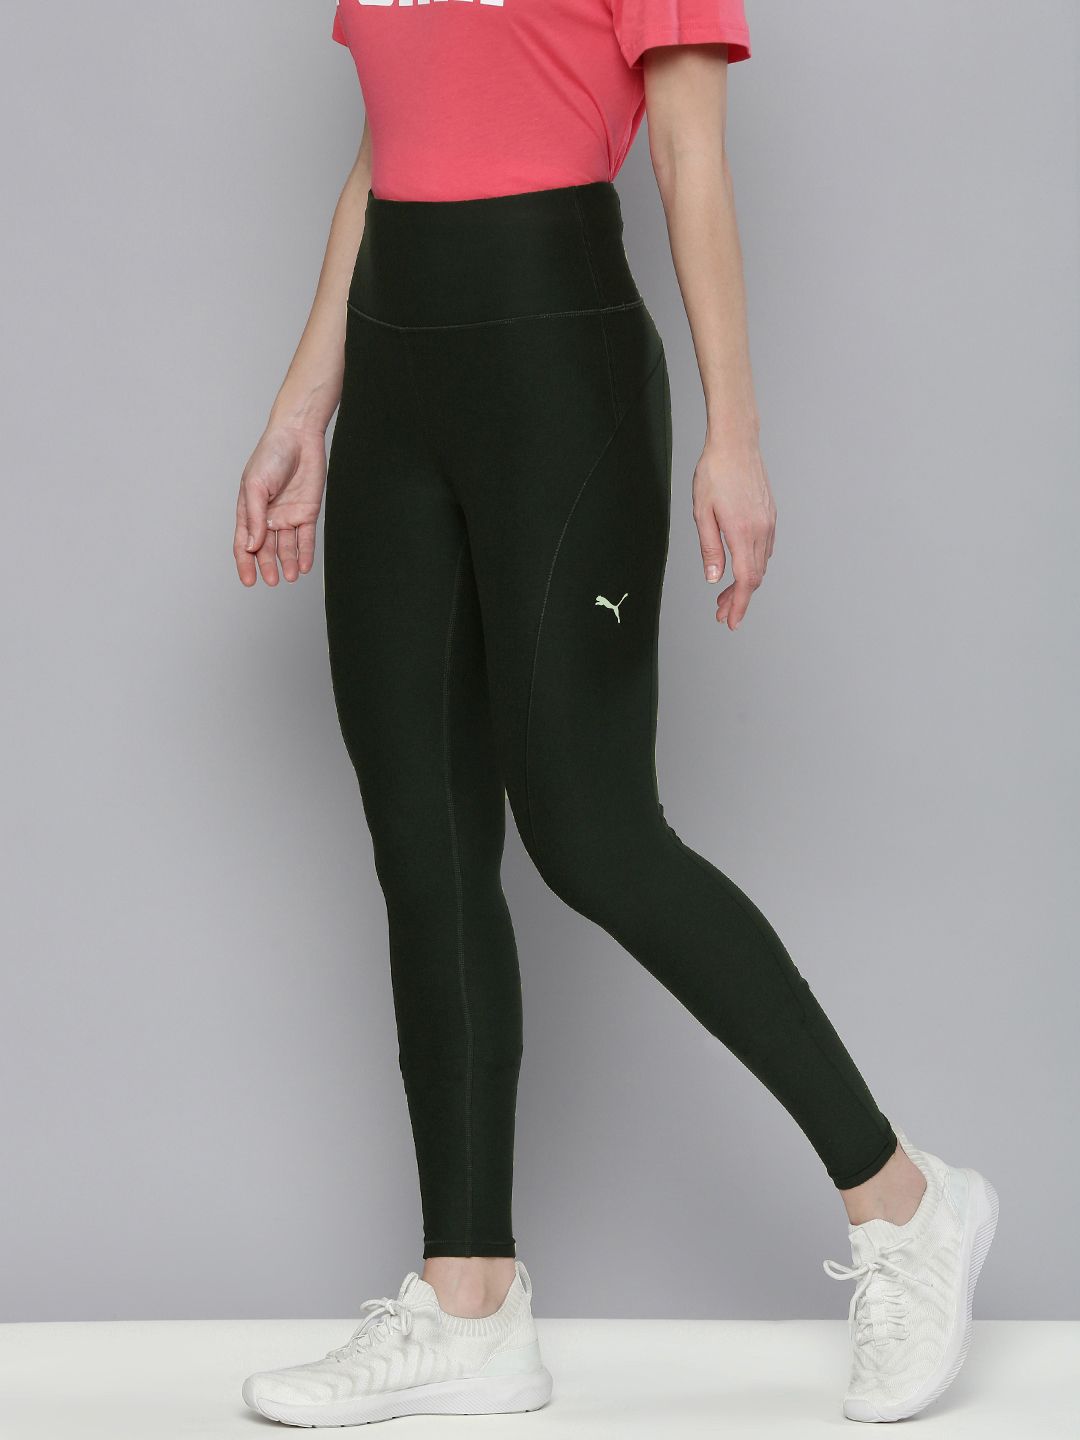 Puma Women Green Solid dryCELL Studio Yogini Luxe High Waist 7/8 Running Yoga Tights Price in India